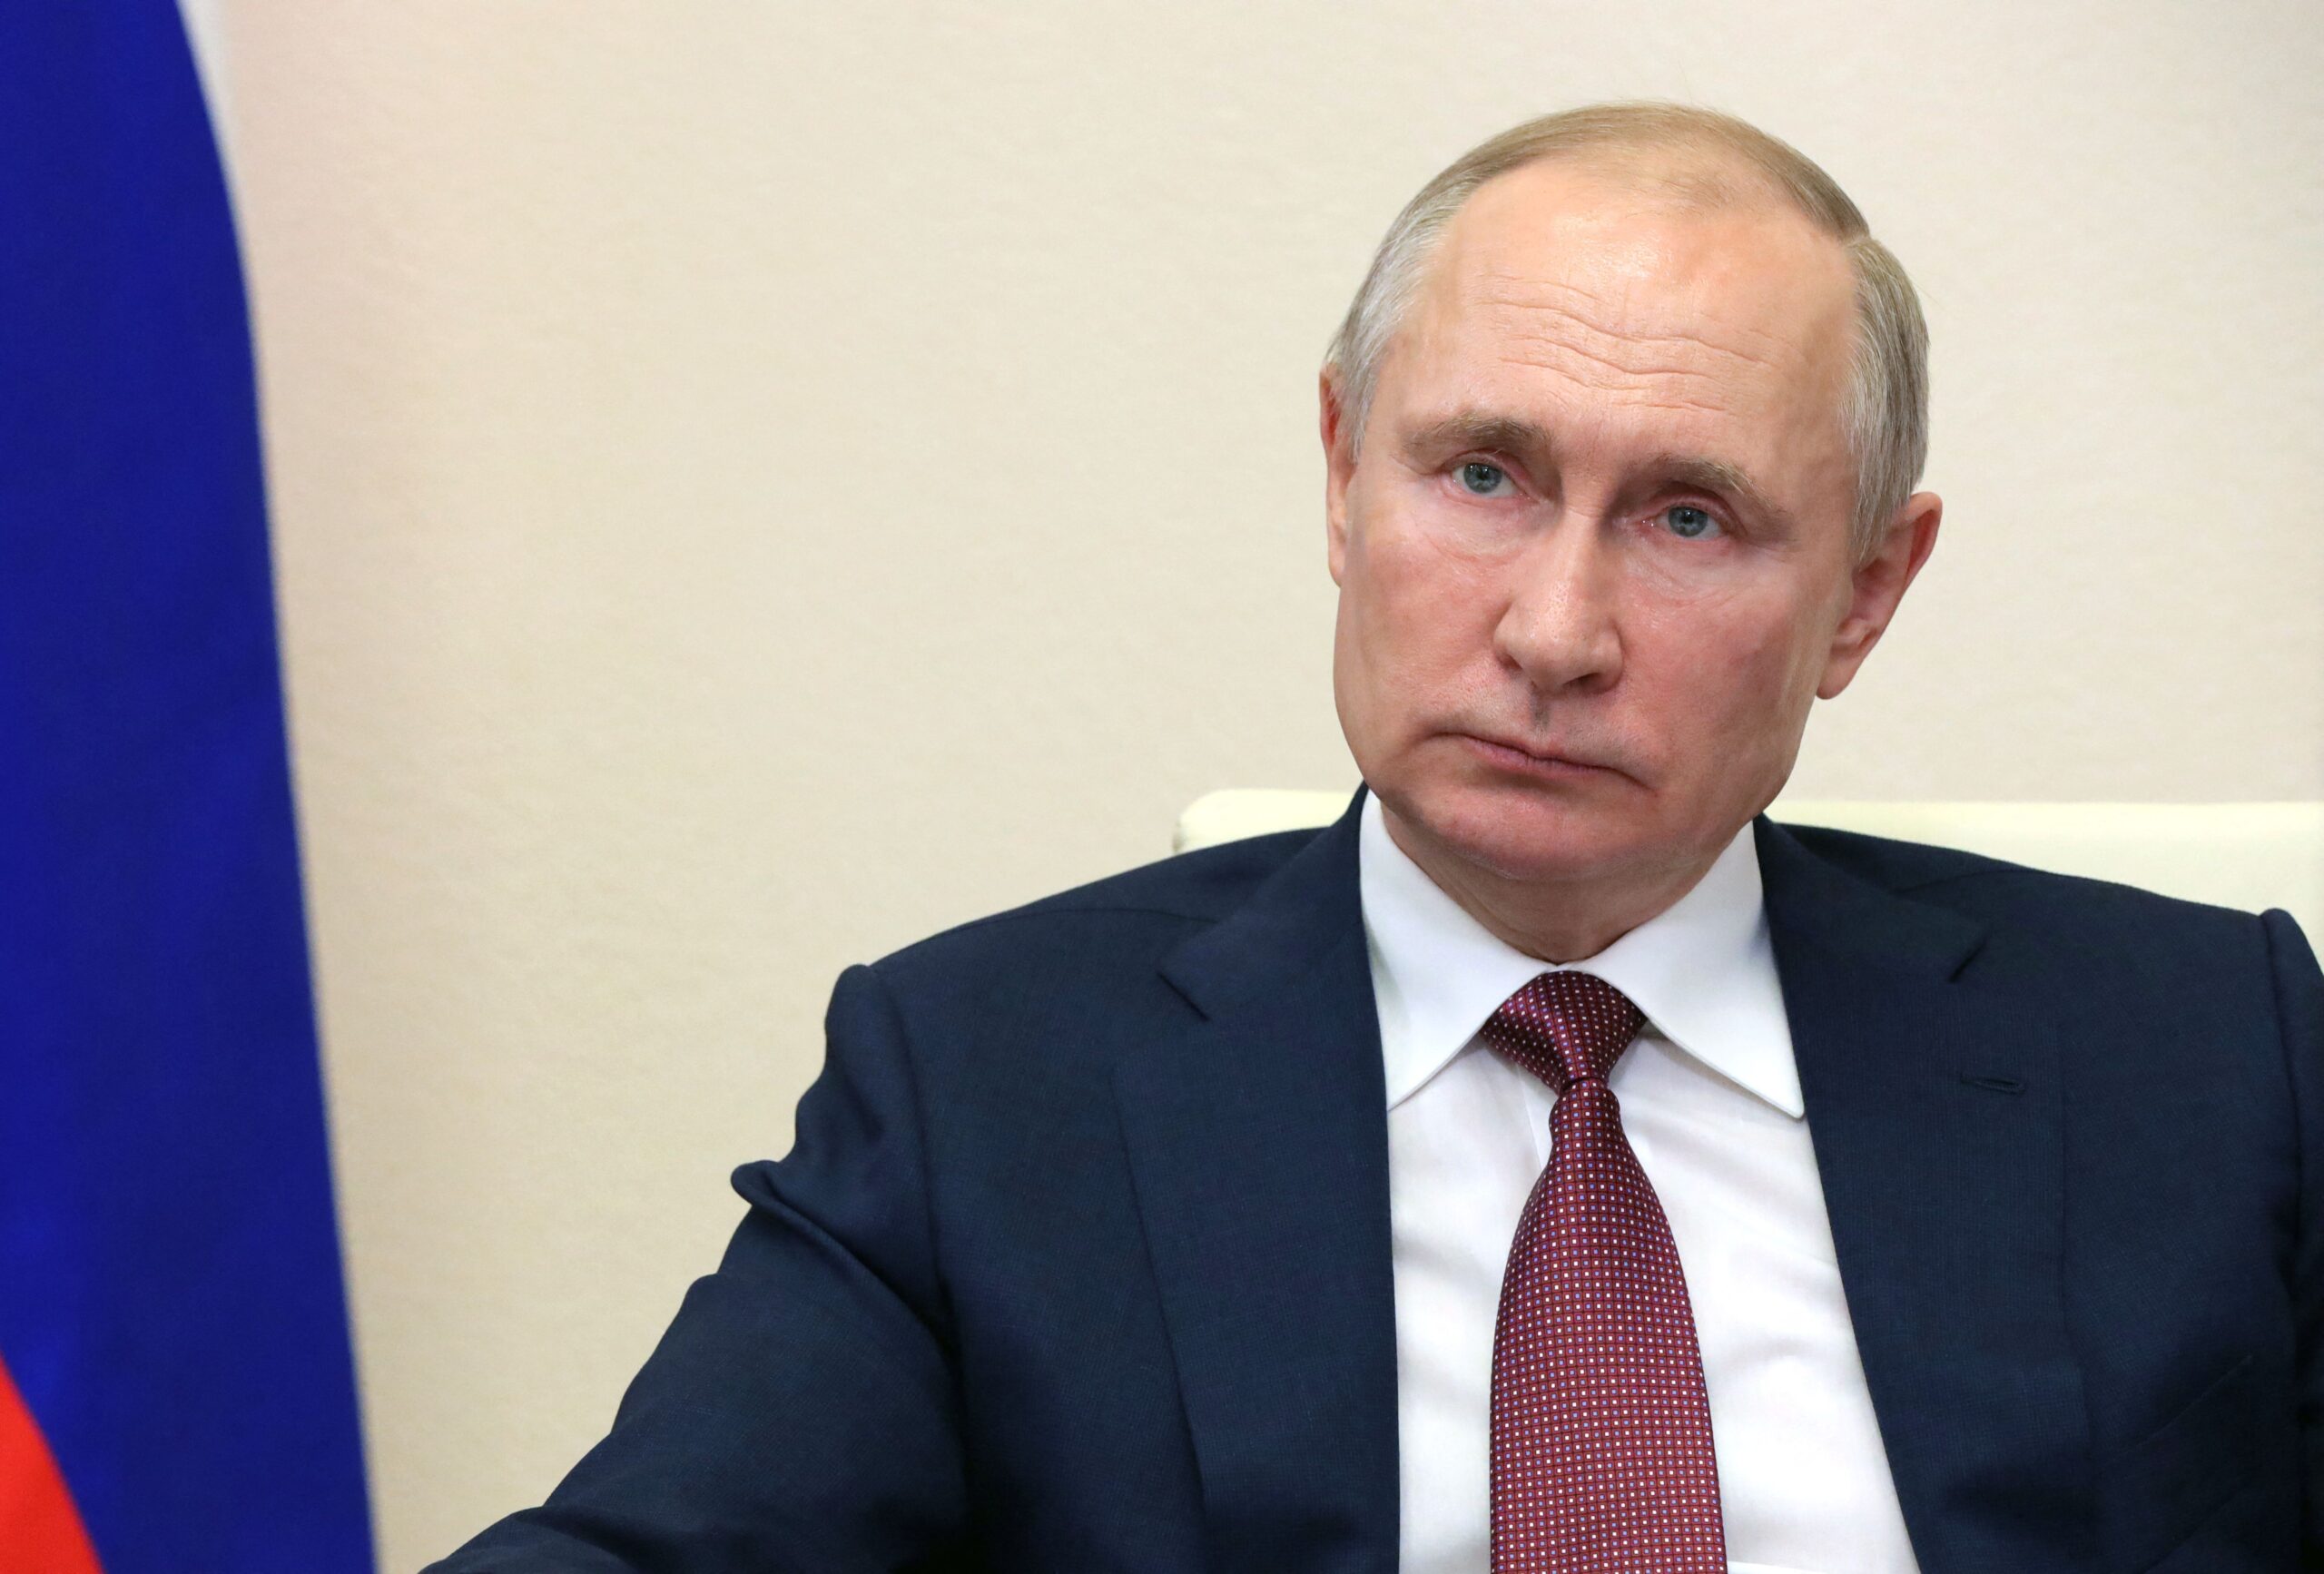 Putin Authorized Wall Street Journal Reporter Arrest, Spying Charges: Report